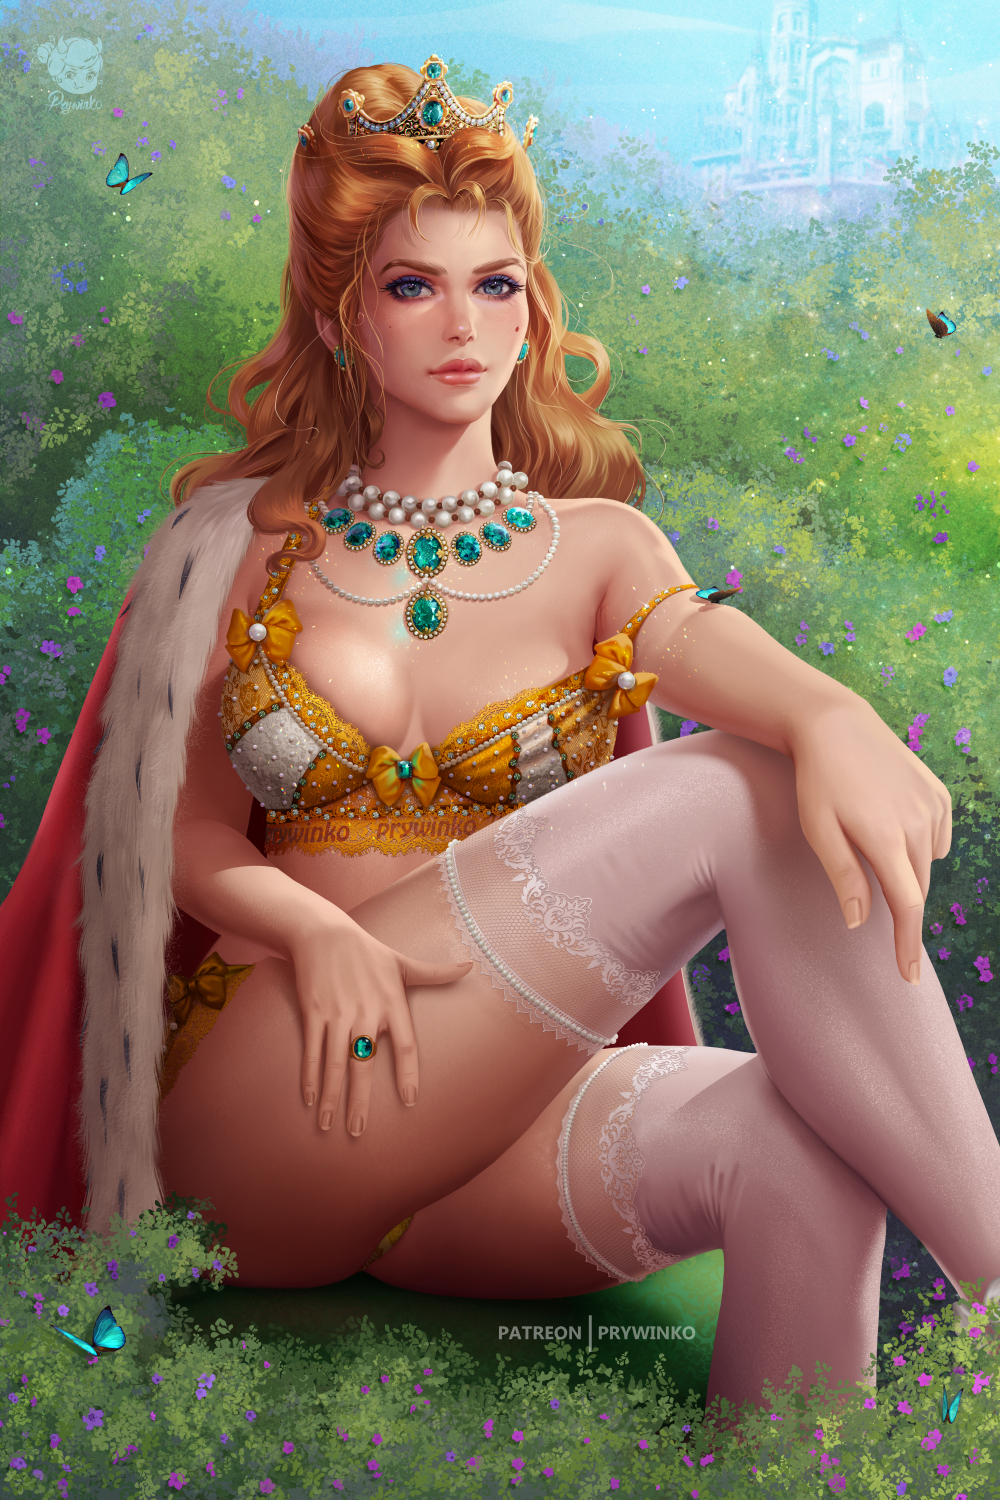 General 1000x1500 Prywinko drawing The Witcher women Anna Henrietta redhead long hair crown blue eyes makeup jewelry necklace gems beads cape bra lingerie panties thigh-highs stockings garden butterfly rings ribbon legs fantasy art fantasy girl sitting looking at viewer boobs